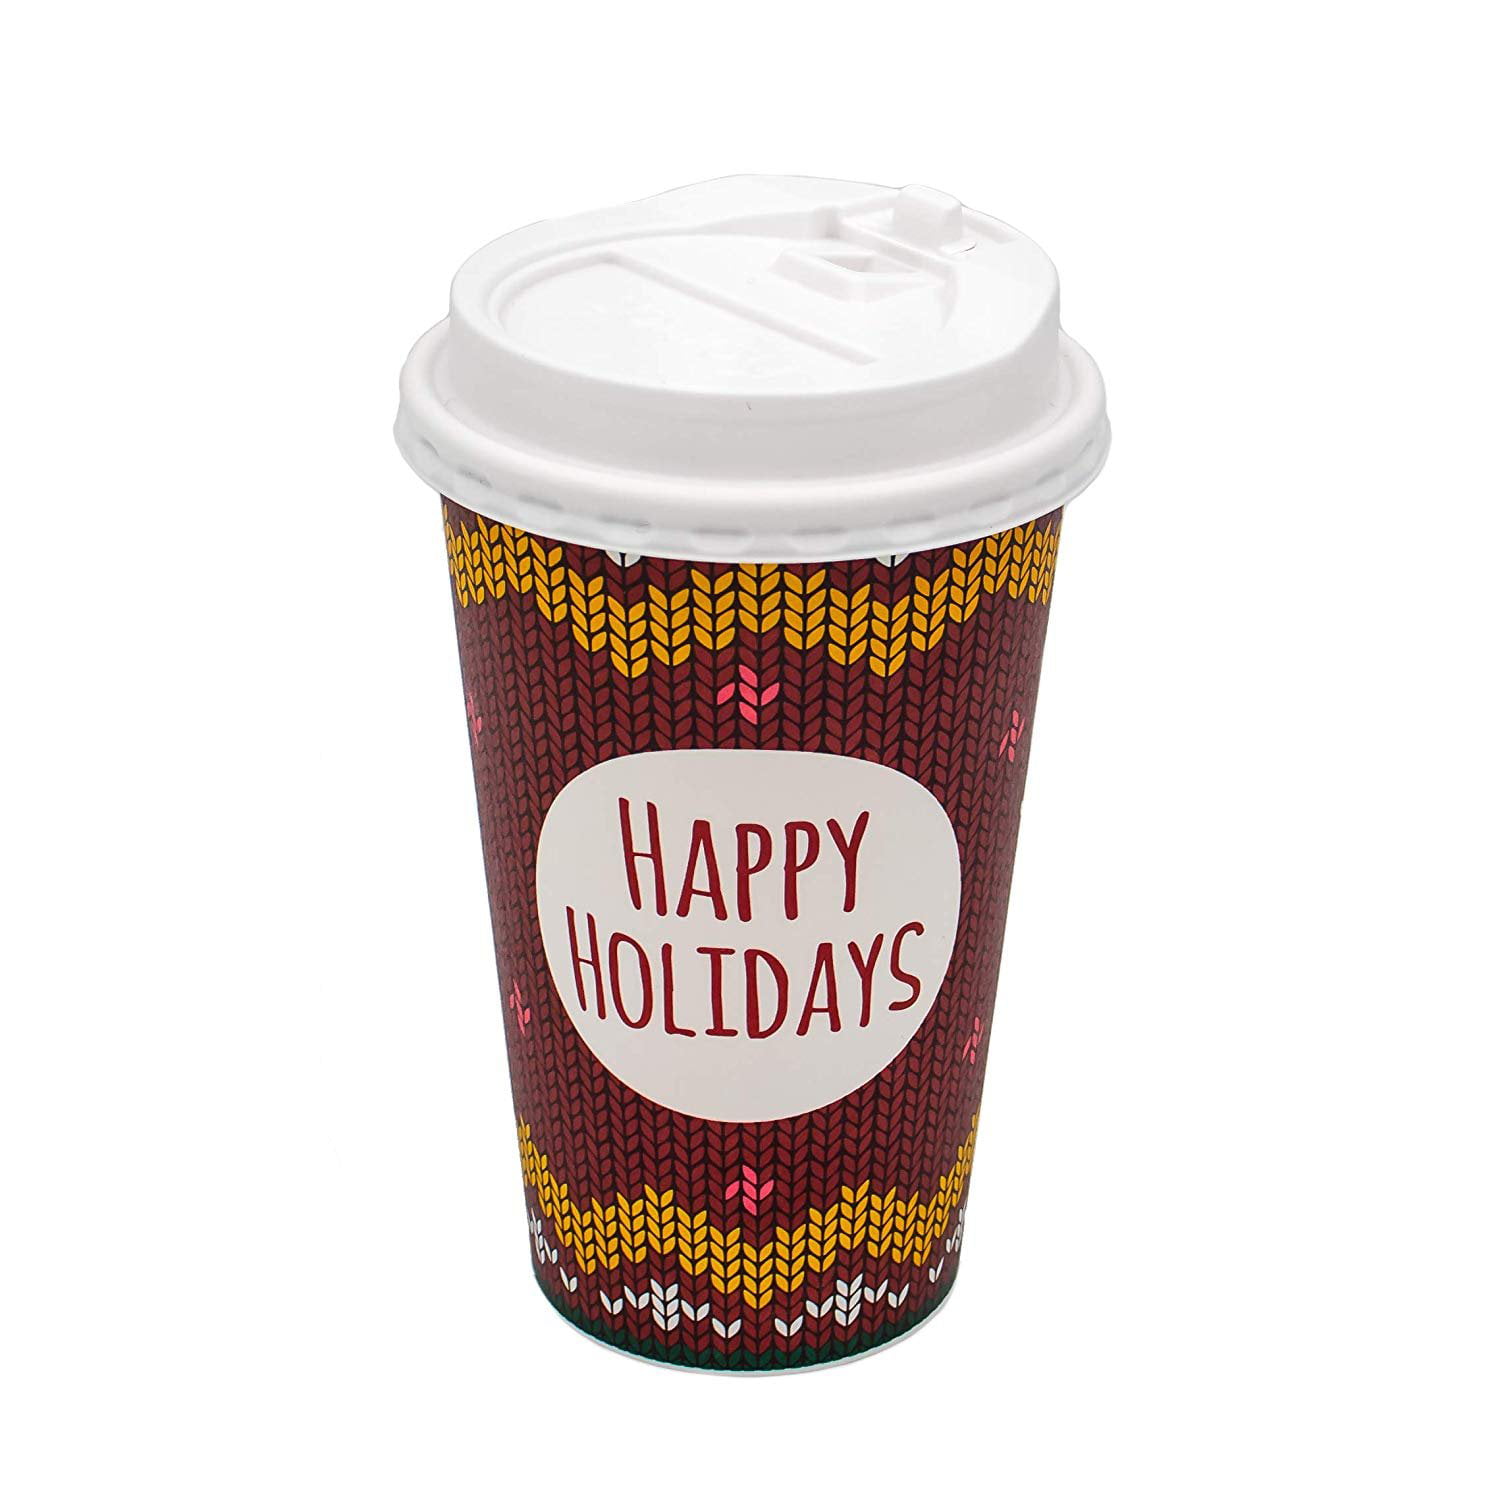 B-KIND Bundle of 50 Holiday Coffee Cups Disposable with Lids. Hot